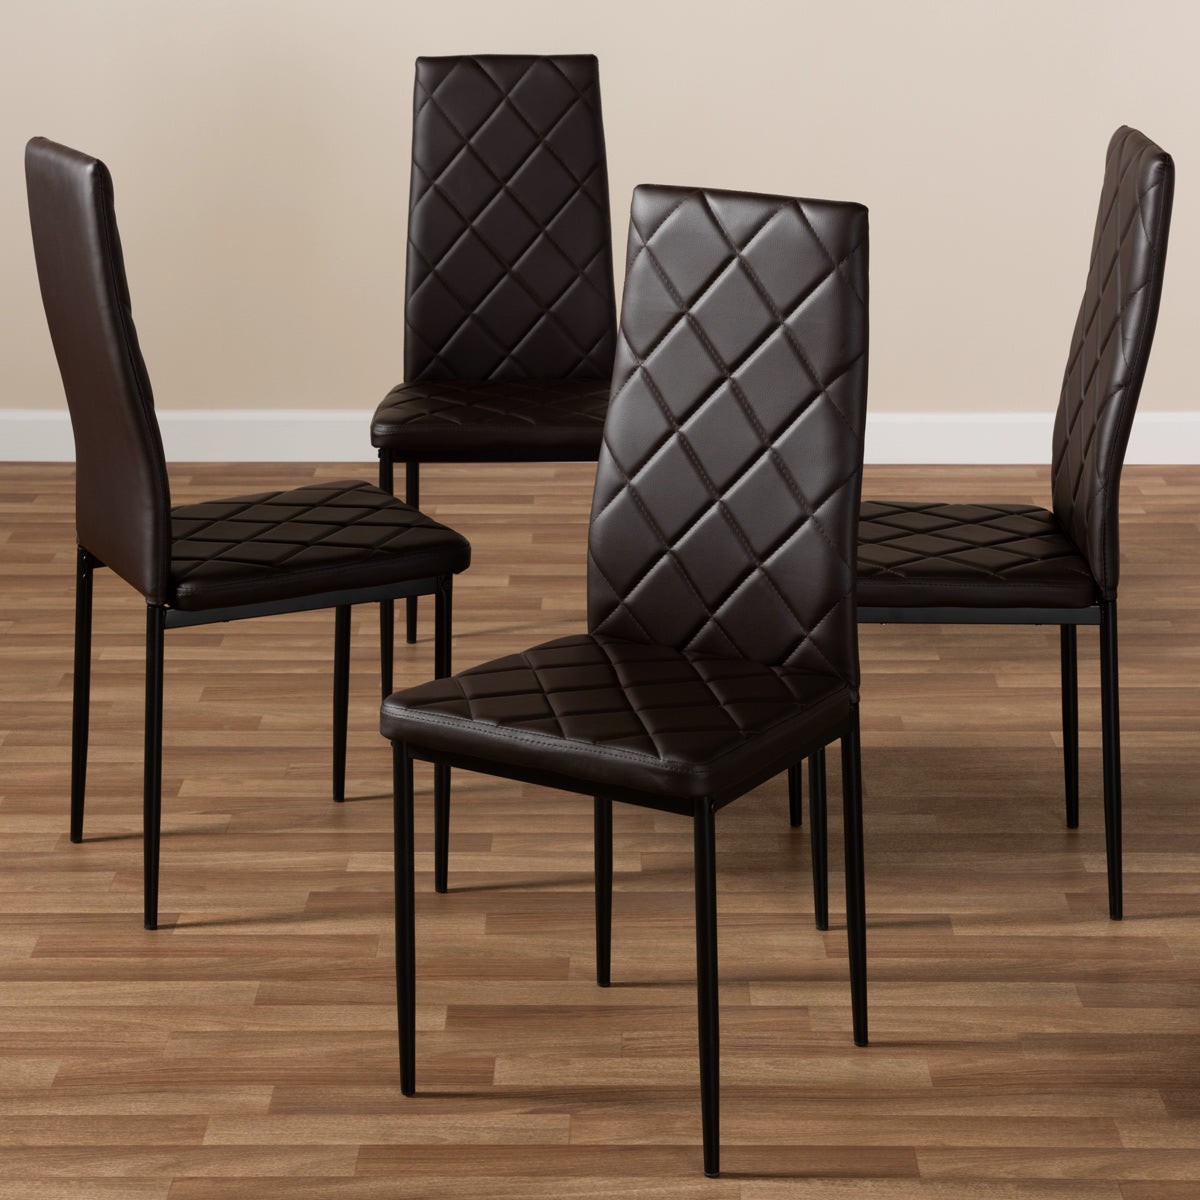 Baxton Studio Blaise Modern and Contemporary Brown Faux Leather Upholstered Dining Chair (Set of 4) Baxton Studio-dining chair-Minimal And Modern - 4